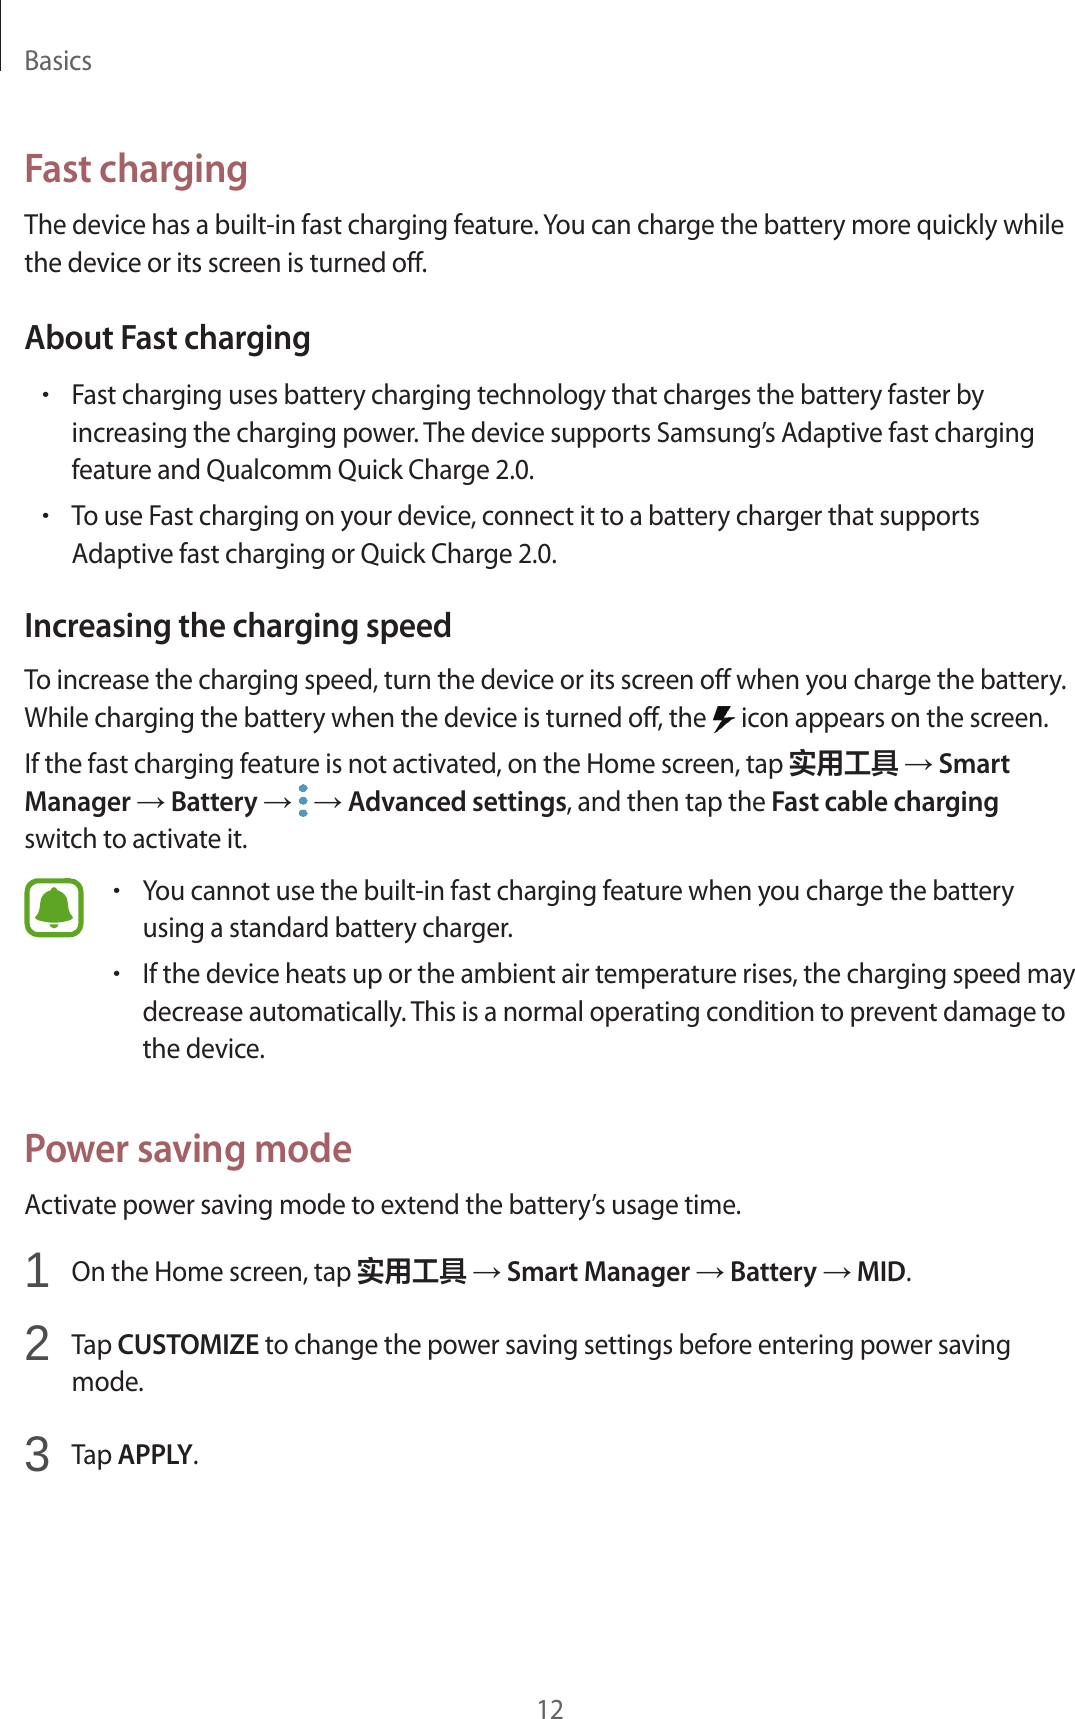 Basics12Fast chargingThe device has a built-in fast charging feature. You can charge the battery more quickly while the device or its screen is turned off.About Fast charging•Fast charging uses battery charging technology that charges the battery faster by increasing the charging power. The device supports Samsung’s Adaptive fast charging feature and Qualcomm Quick Charge 2.0.•To use Fast charging on your device, connect it to a battery charger that supports Adaptive fast charging or Quick Charge 2.0.Increasing the charging speedTo increase the charging speed, turn the device or its screen off when you charge the battery. While charging the battery when the device is turned off, the   icon appears on the screen.If the fast charging feature is not activated, on the Home screen, tap 实用工具 → Smart Manager → Battery →  → Advanced settings, and then tap the Fast cable charging switch to activate it.•You cannot use the built-in fast charging feature when you charge the battery using a standard battery charger.•If the device heats up or the ambient air temperature rises, the charging speed may decrease automatically. This is a normal operating condition to prevent damage to the device.Power saving modeActivate power saving mode to extend the battery’s usage time.1  On the Home screen, tap 实用工具 → Smart Manager → Battery → MID.2  Tap CUSTOMIZE to change the power saving settings before entering power saving mode.3  Tap APPLY.